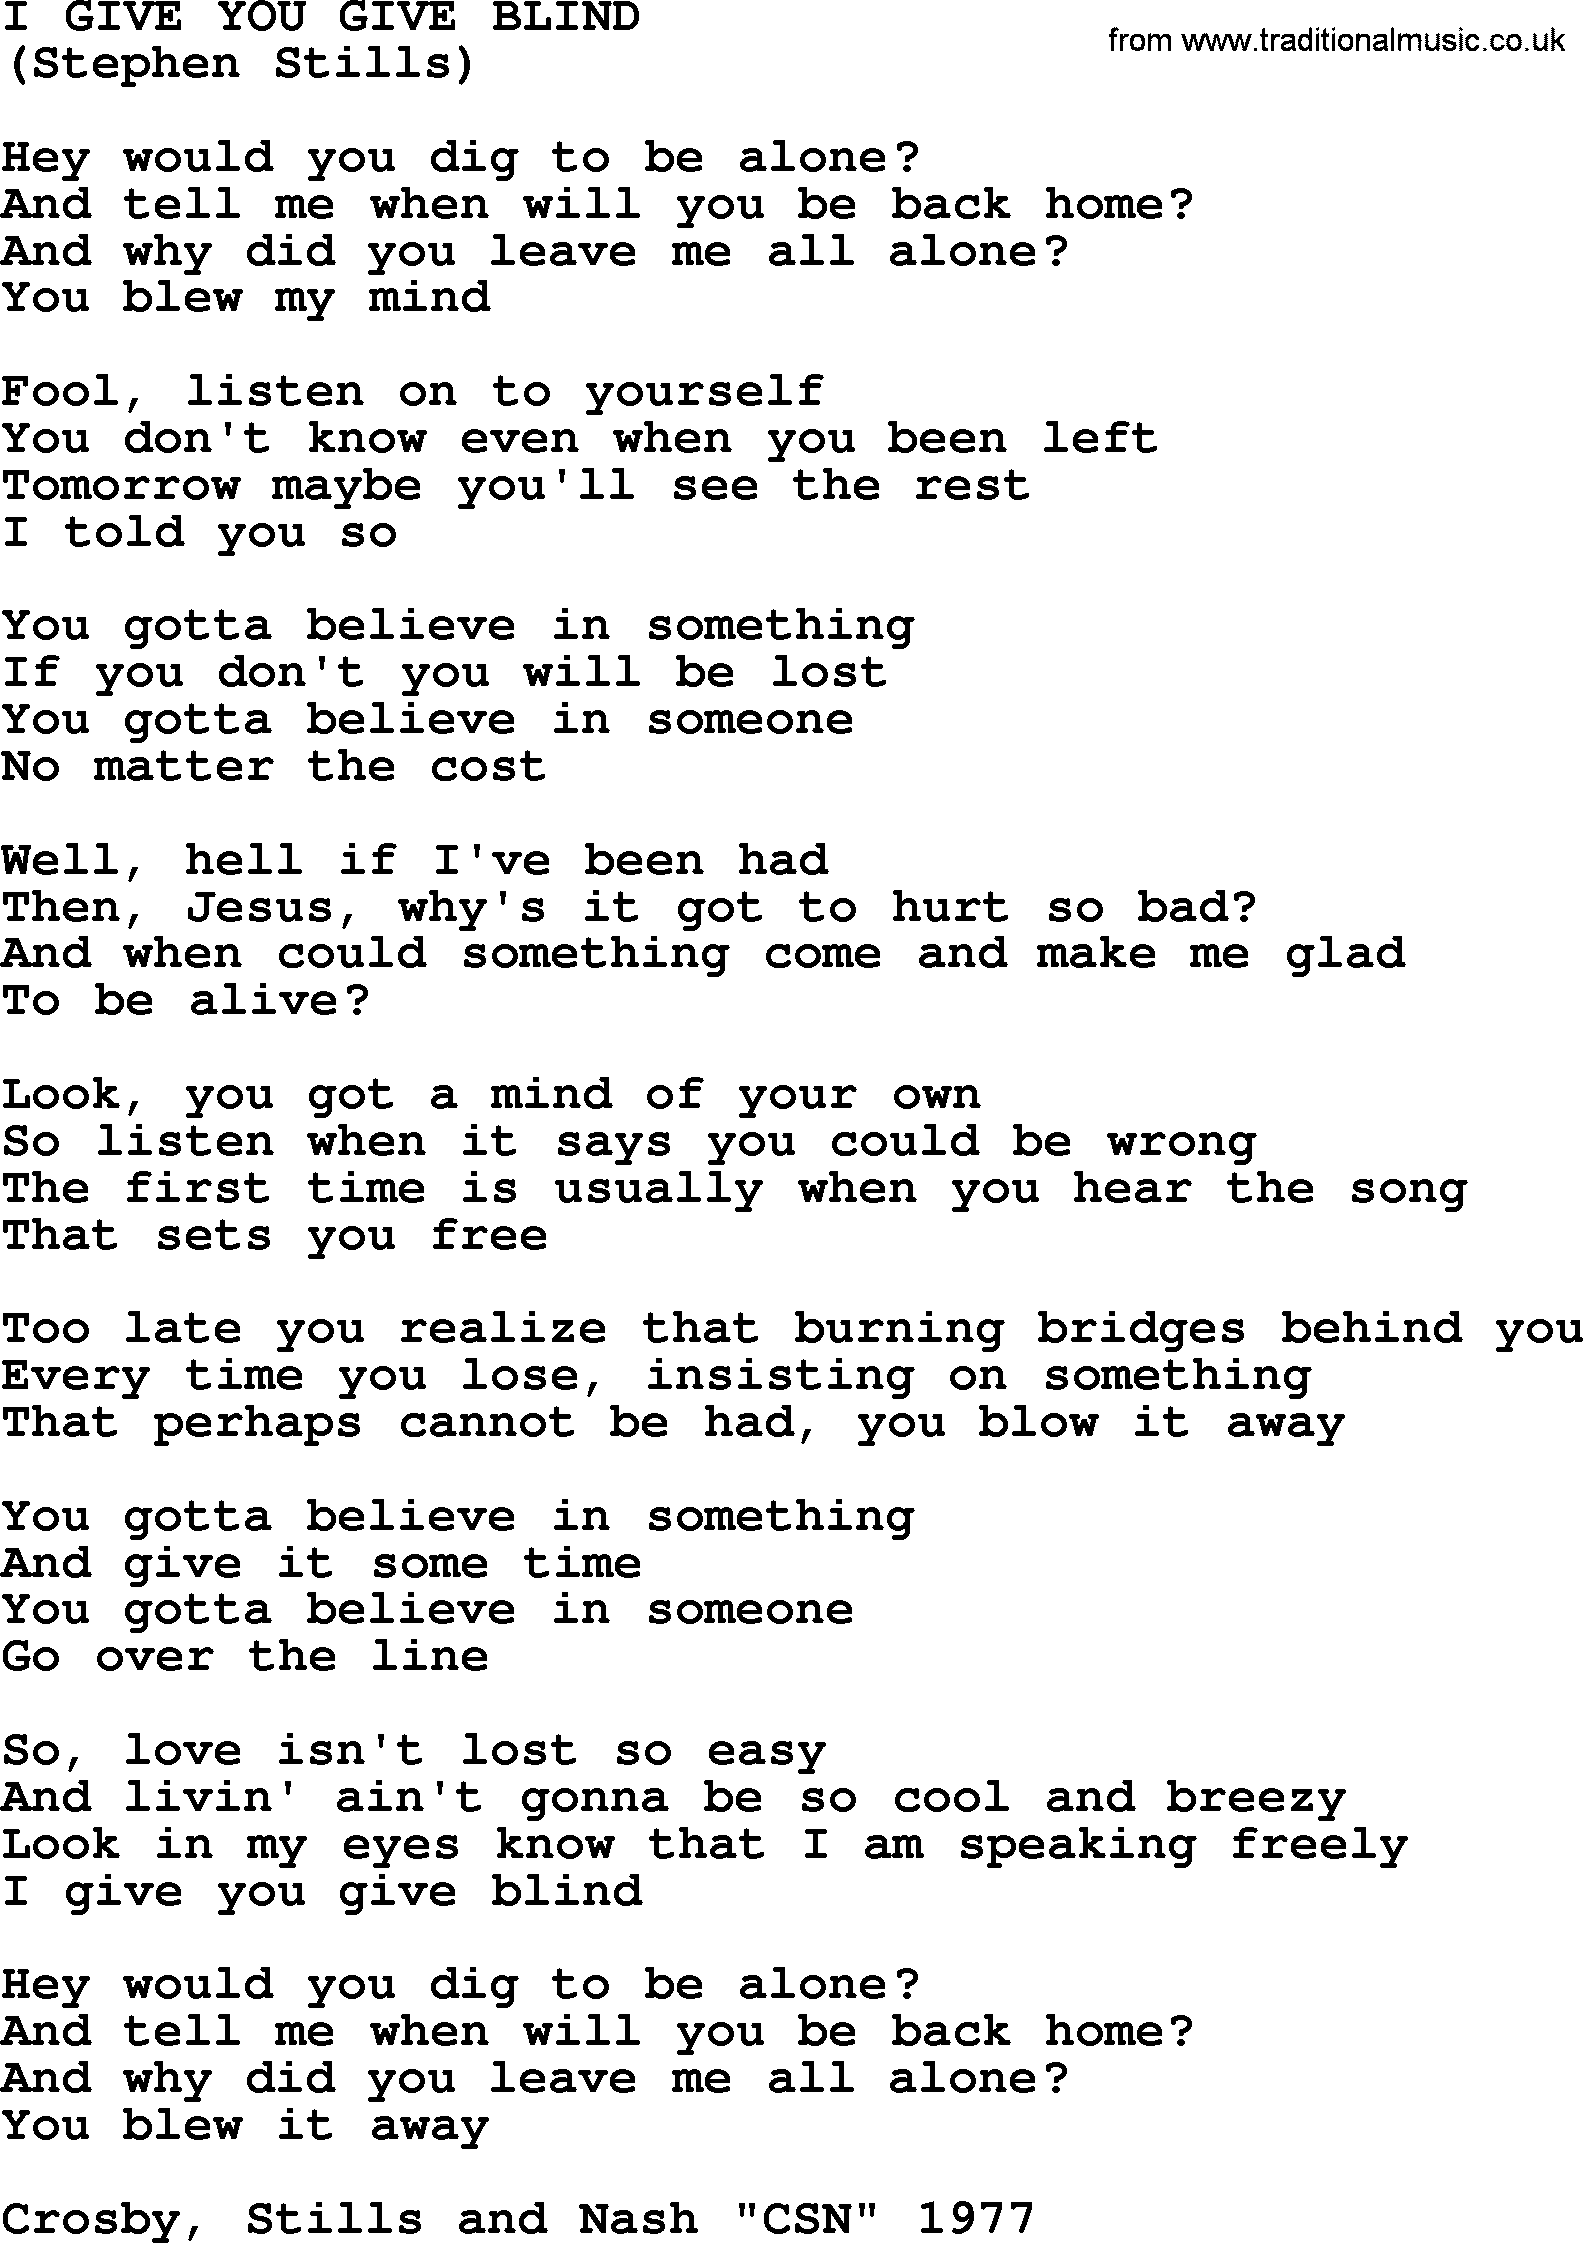 The Byrds song I Give You Give Blind, lyrics